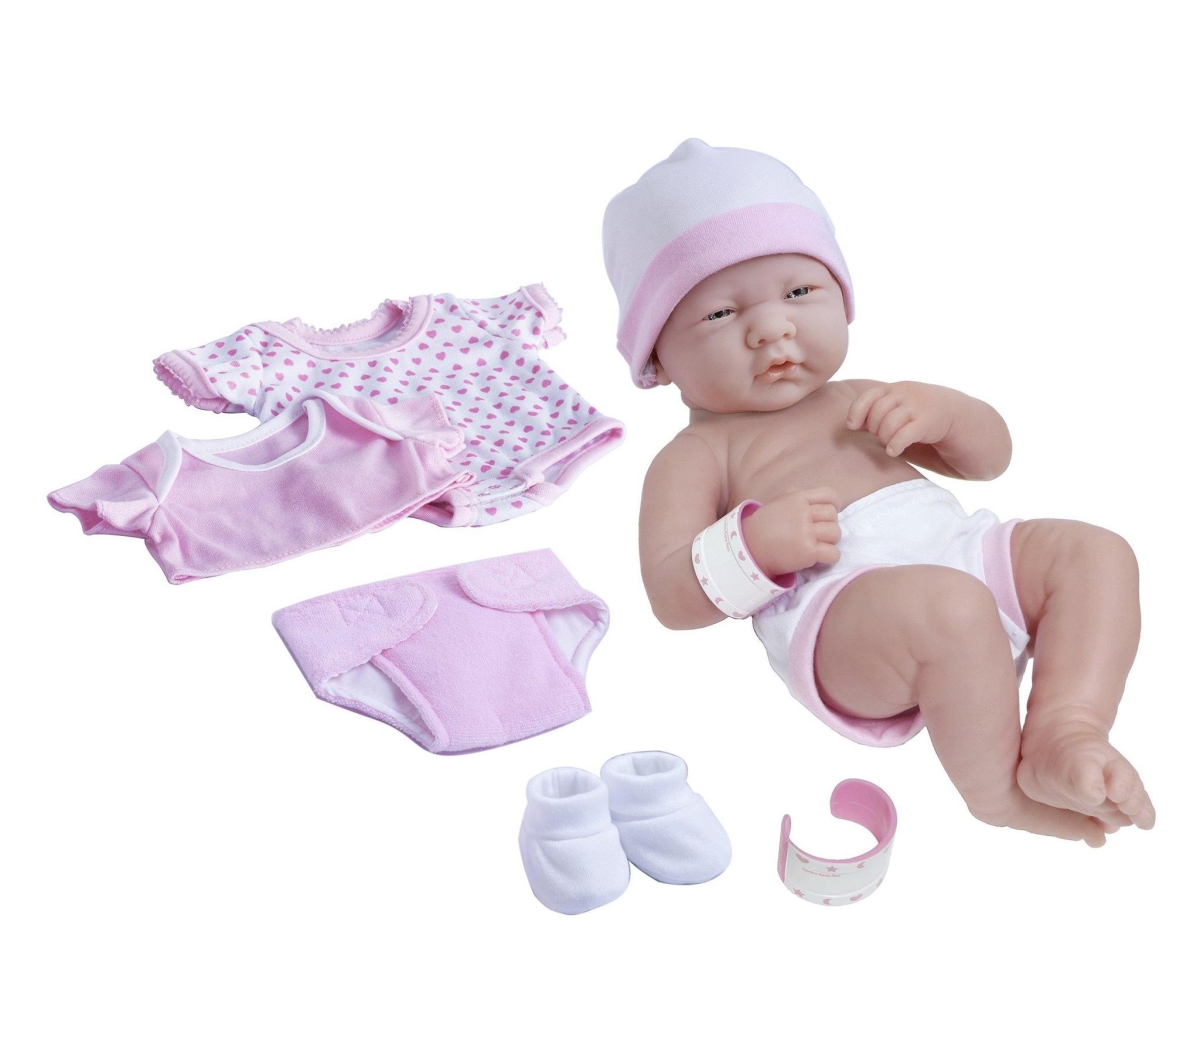 Picture of La Newborn Nursery 8 Piece Layette Pink Baby Doll Gift Set 14 in. Lifelike Newborn Doll-Accessories - Ages 2 Plus